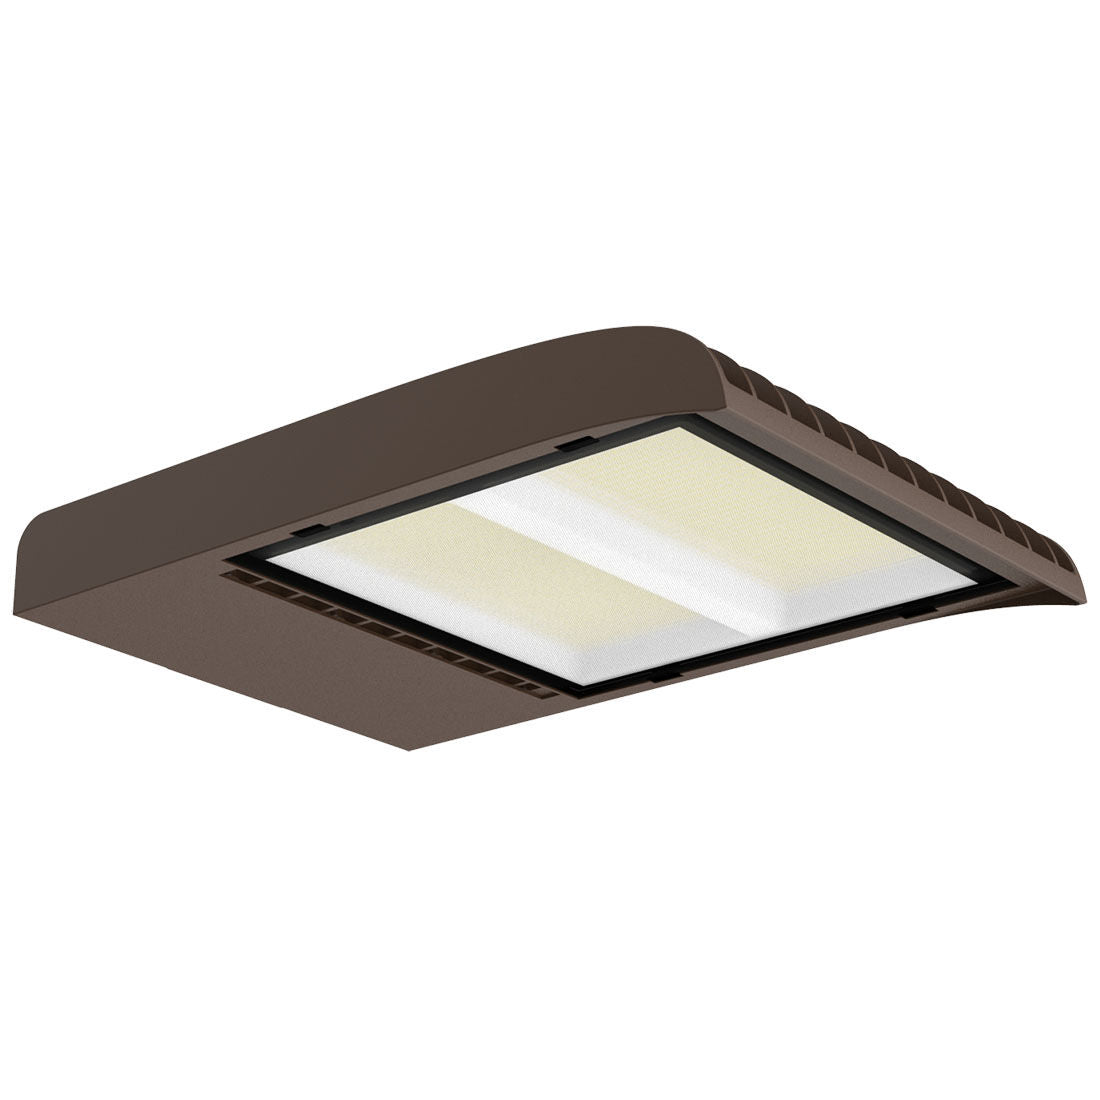 Westgate LFXE-XL-200-300W-MCTP-P Builder Series Flood/Area Light with Photocell Type 3 Lens (Photocell Disconnect Switch) - Dark Bronze